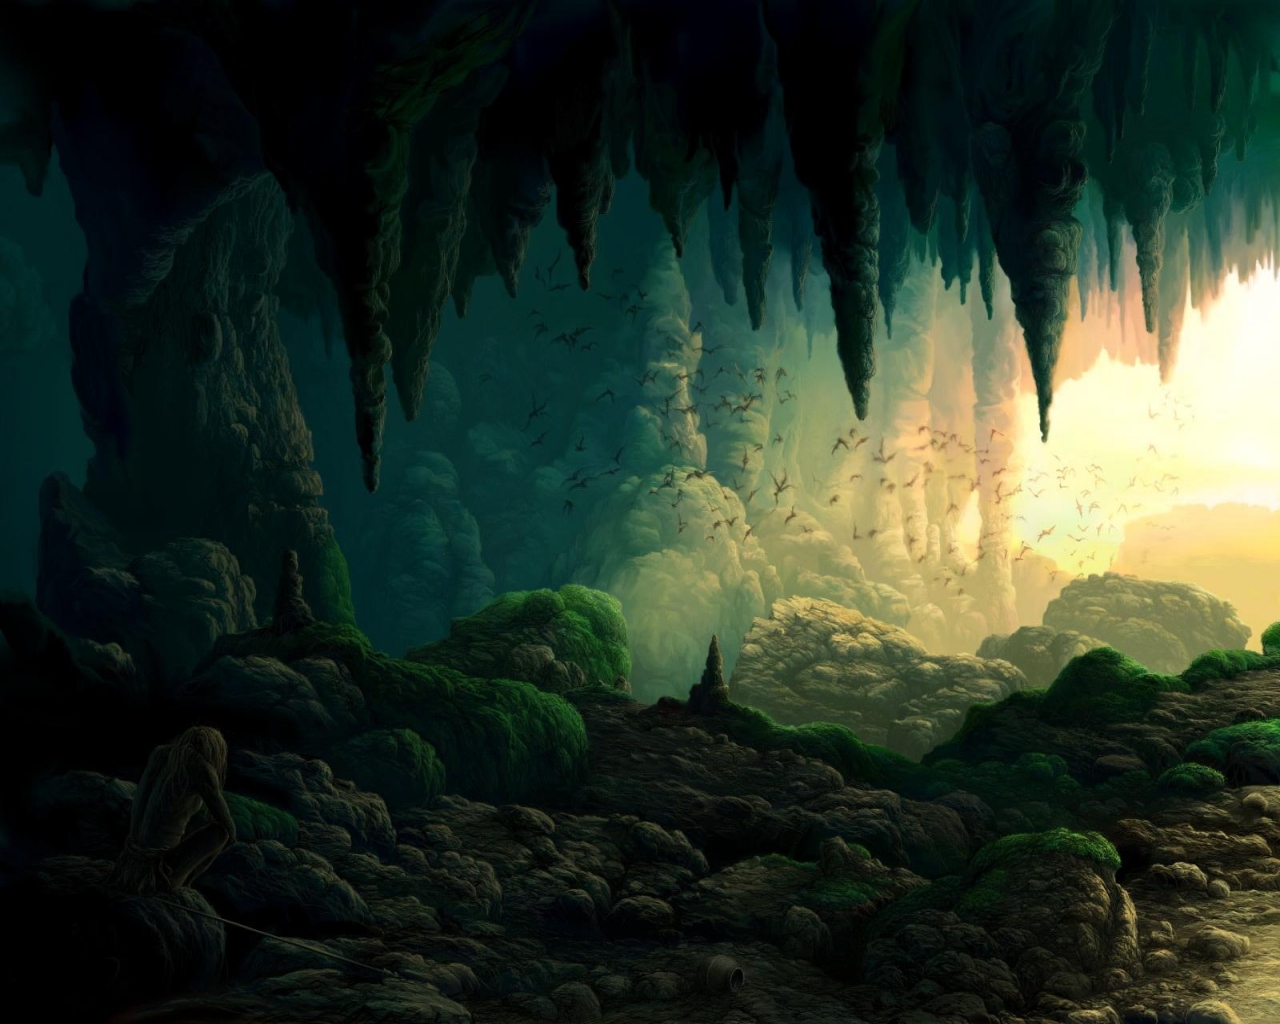 Download Caveman in the Green Cave.